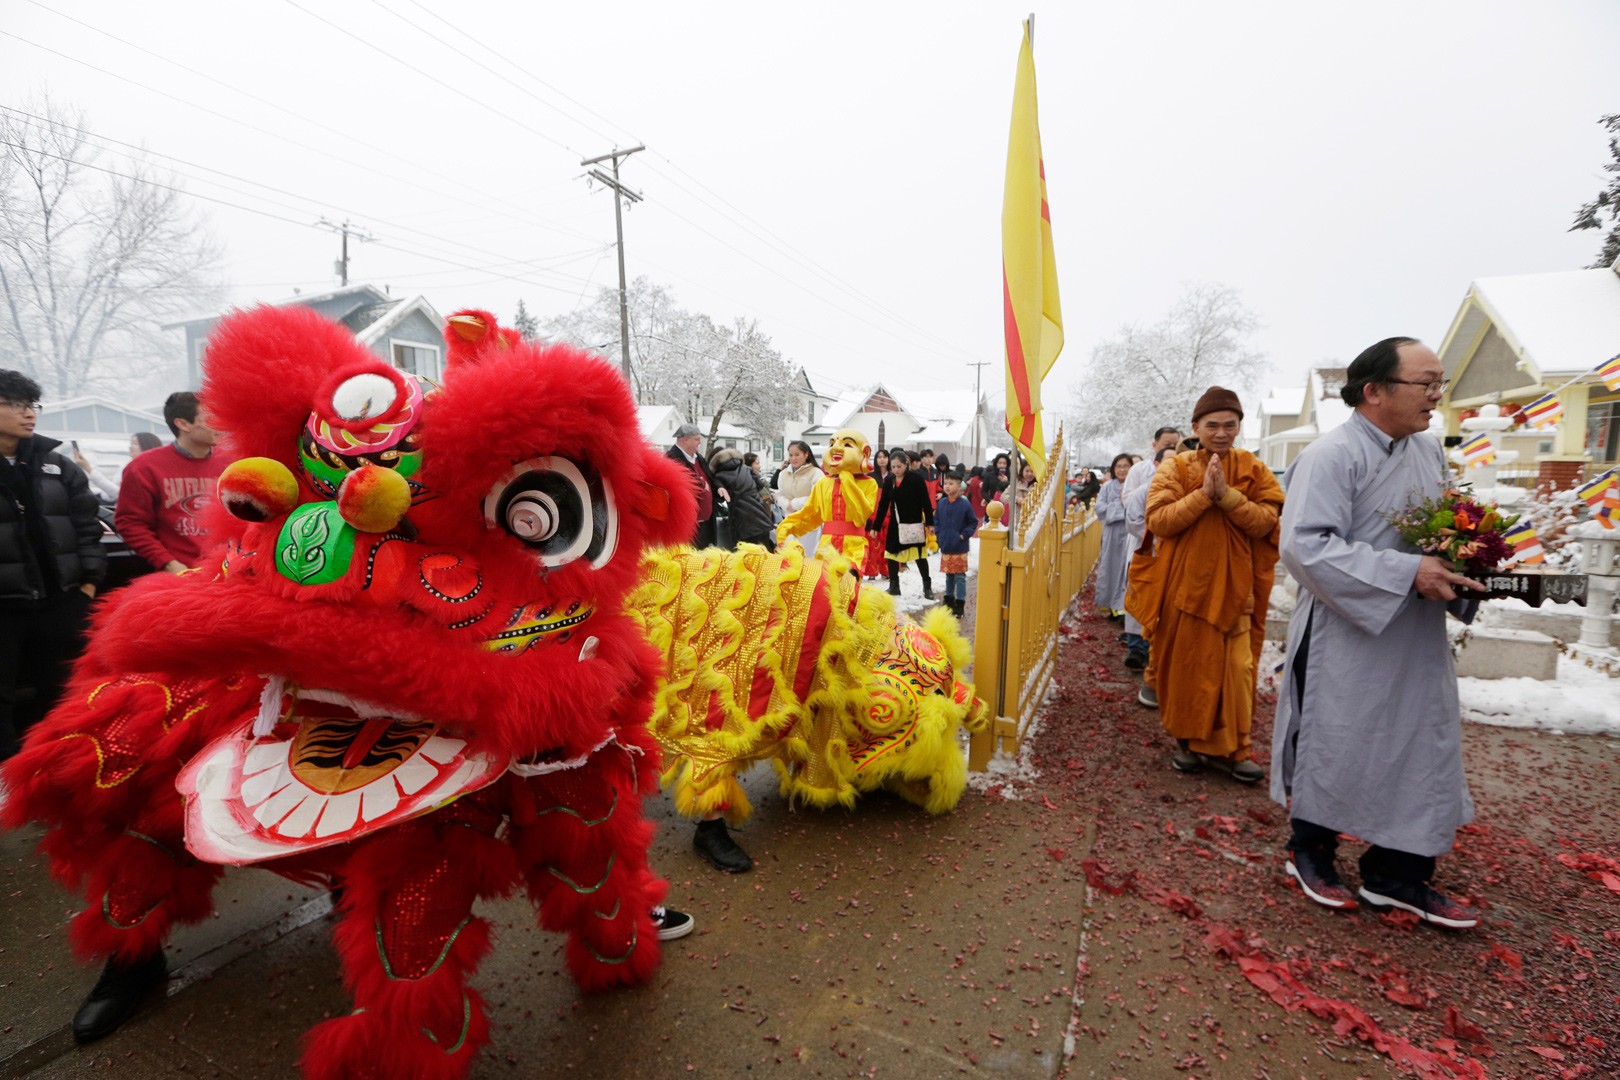 After massive turnout for its inaugural run, Spokane's Lunar New Year